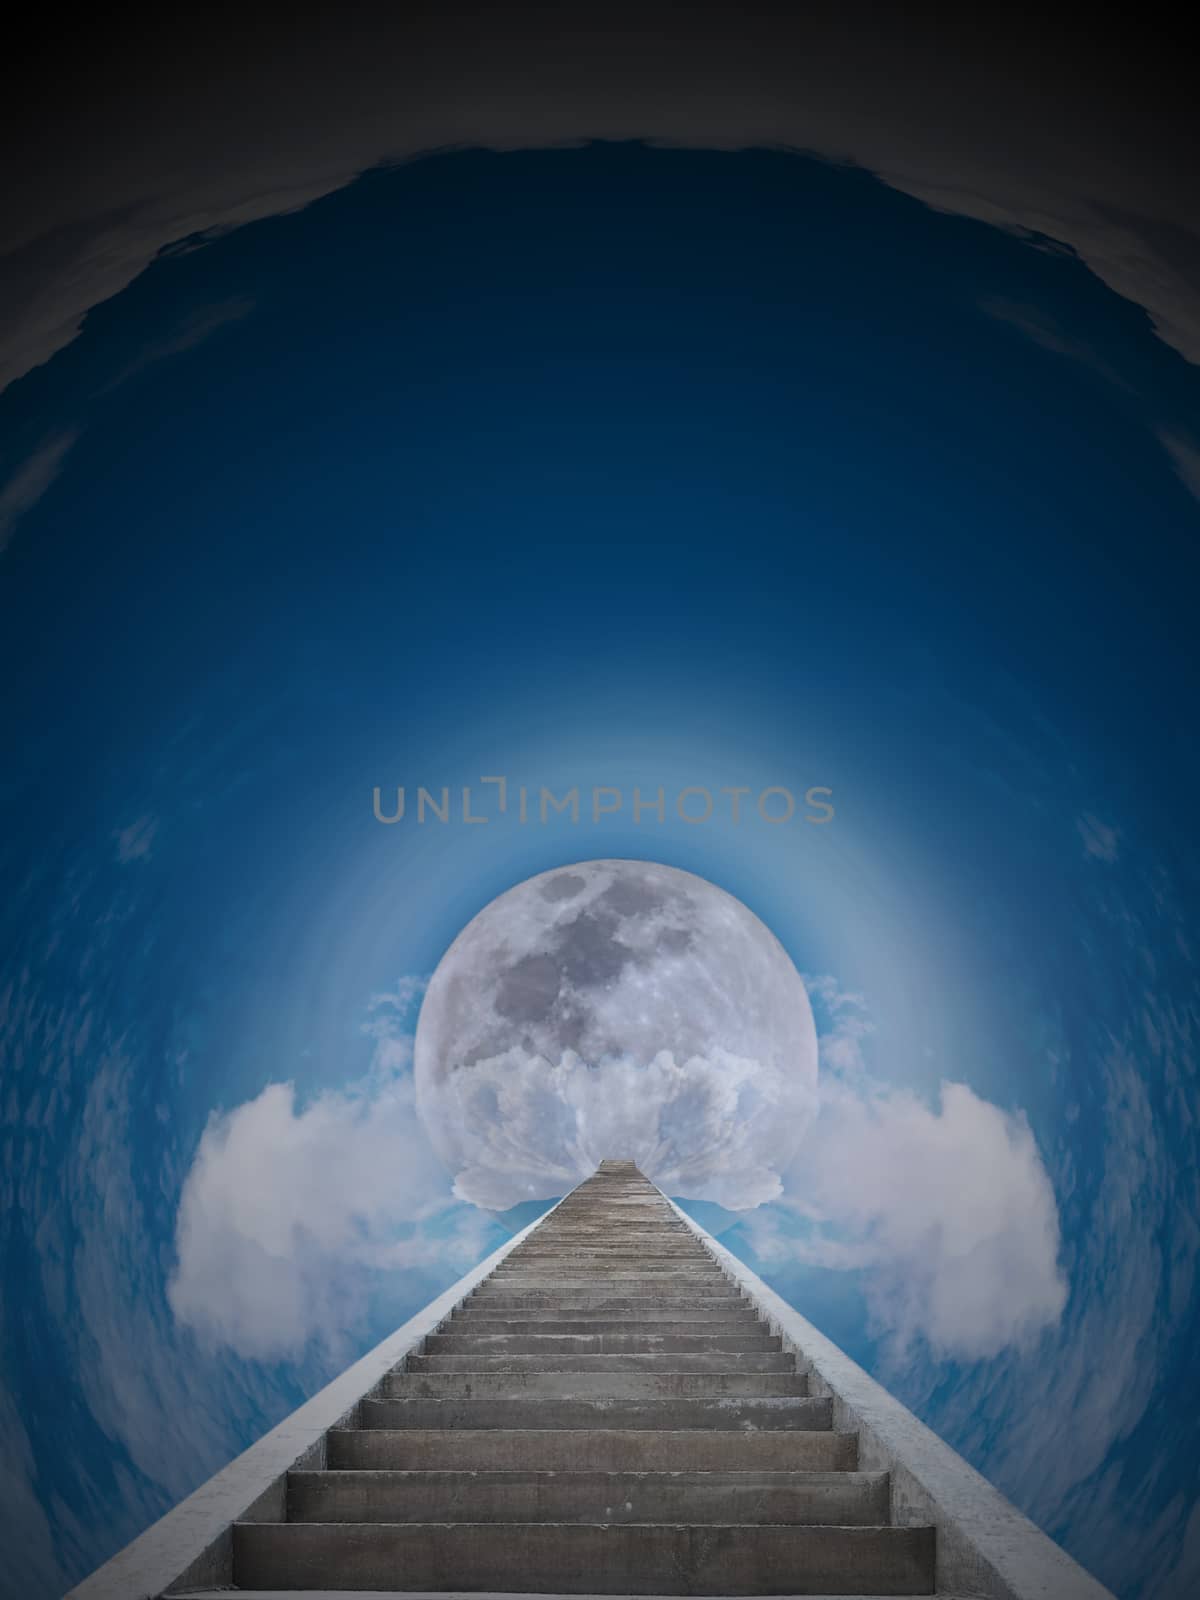 The shortcut to the moon in cloud tunnel